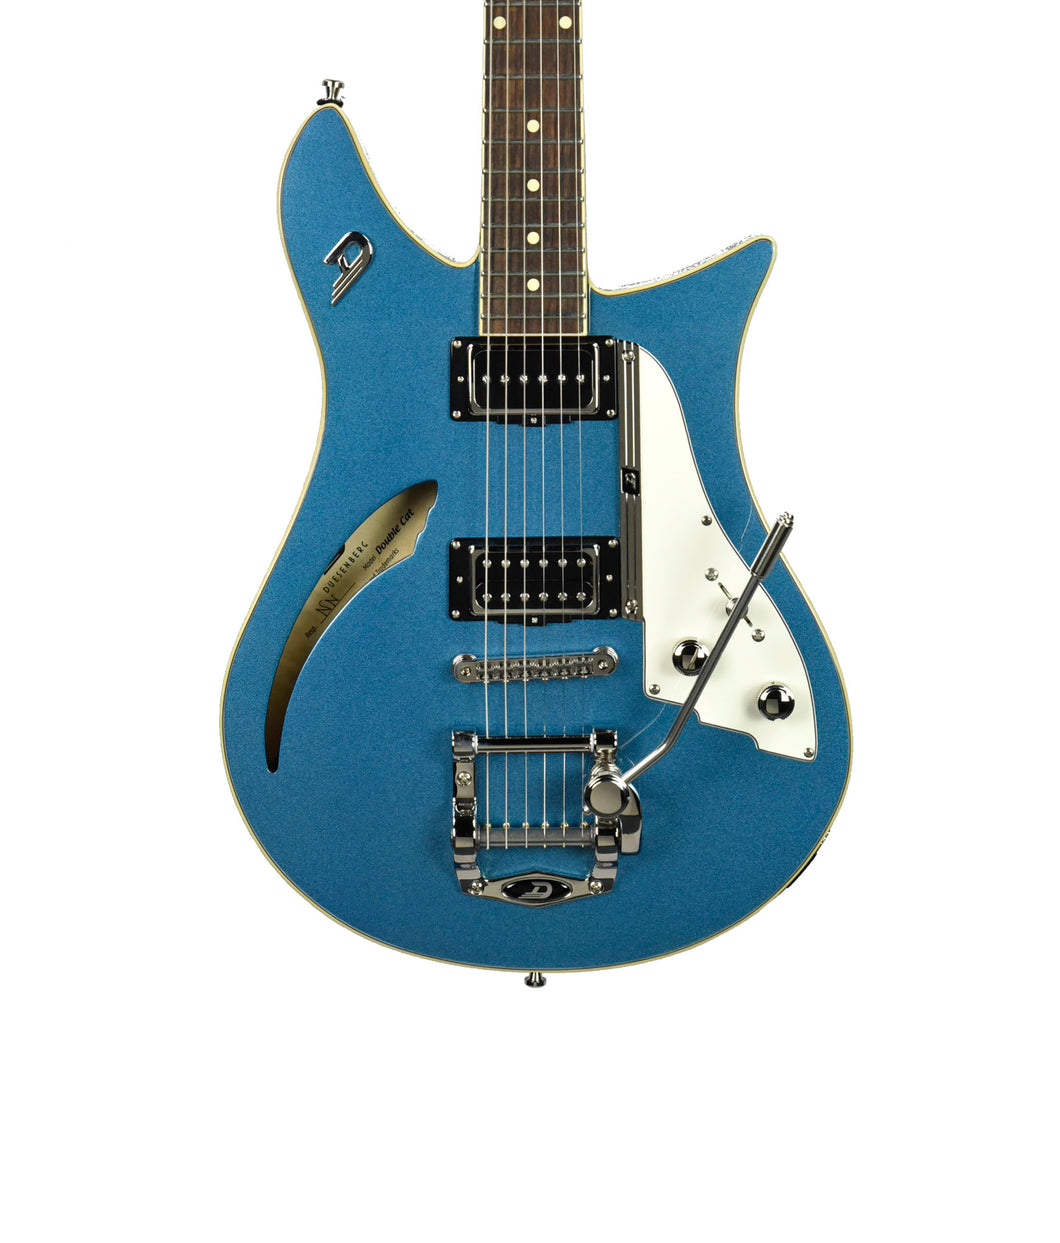 Used Duesenberg Double Cat Electric Guitar in Catalina Blue 211819 - The Music Gallery